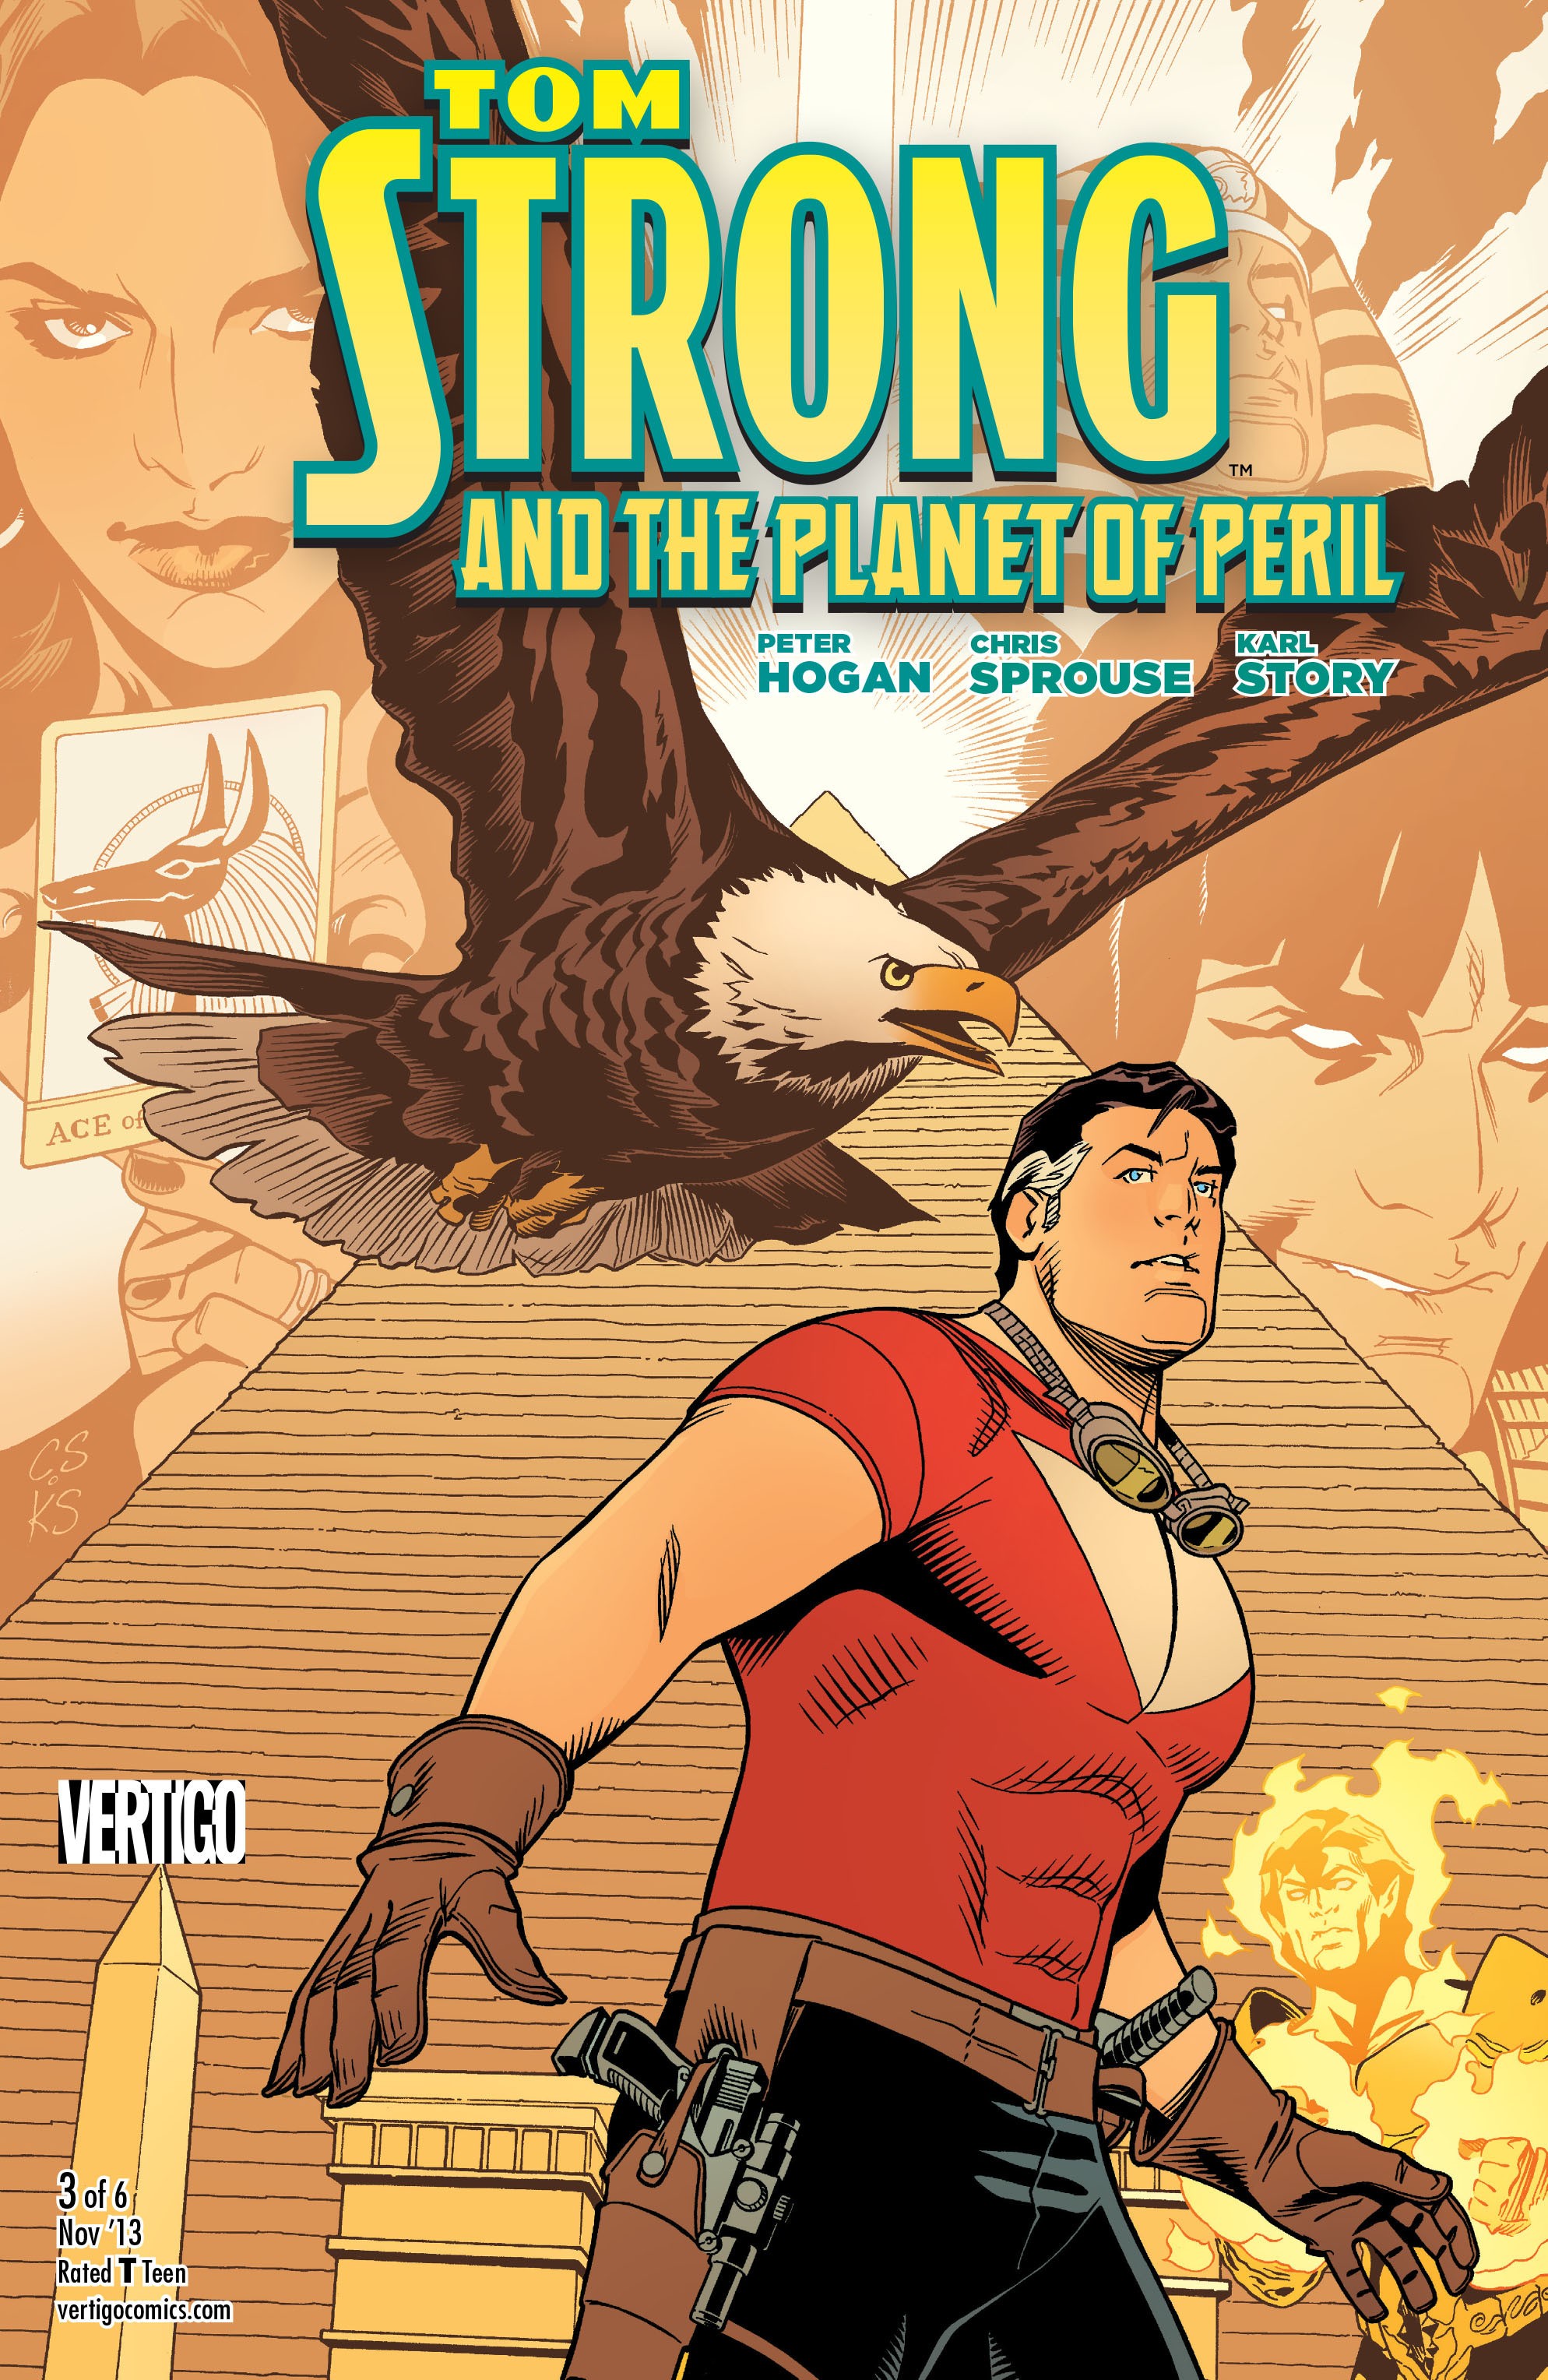 Tom Strong and the Planet of Peril Vol. 1 #3